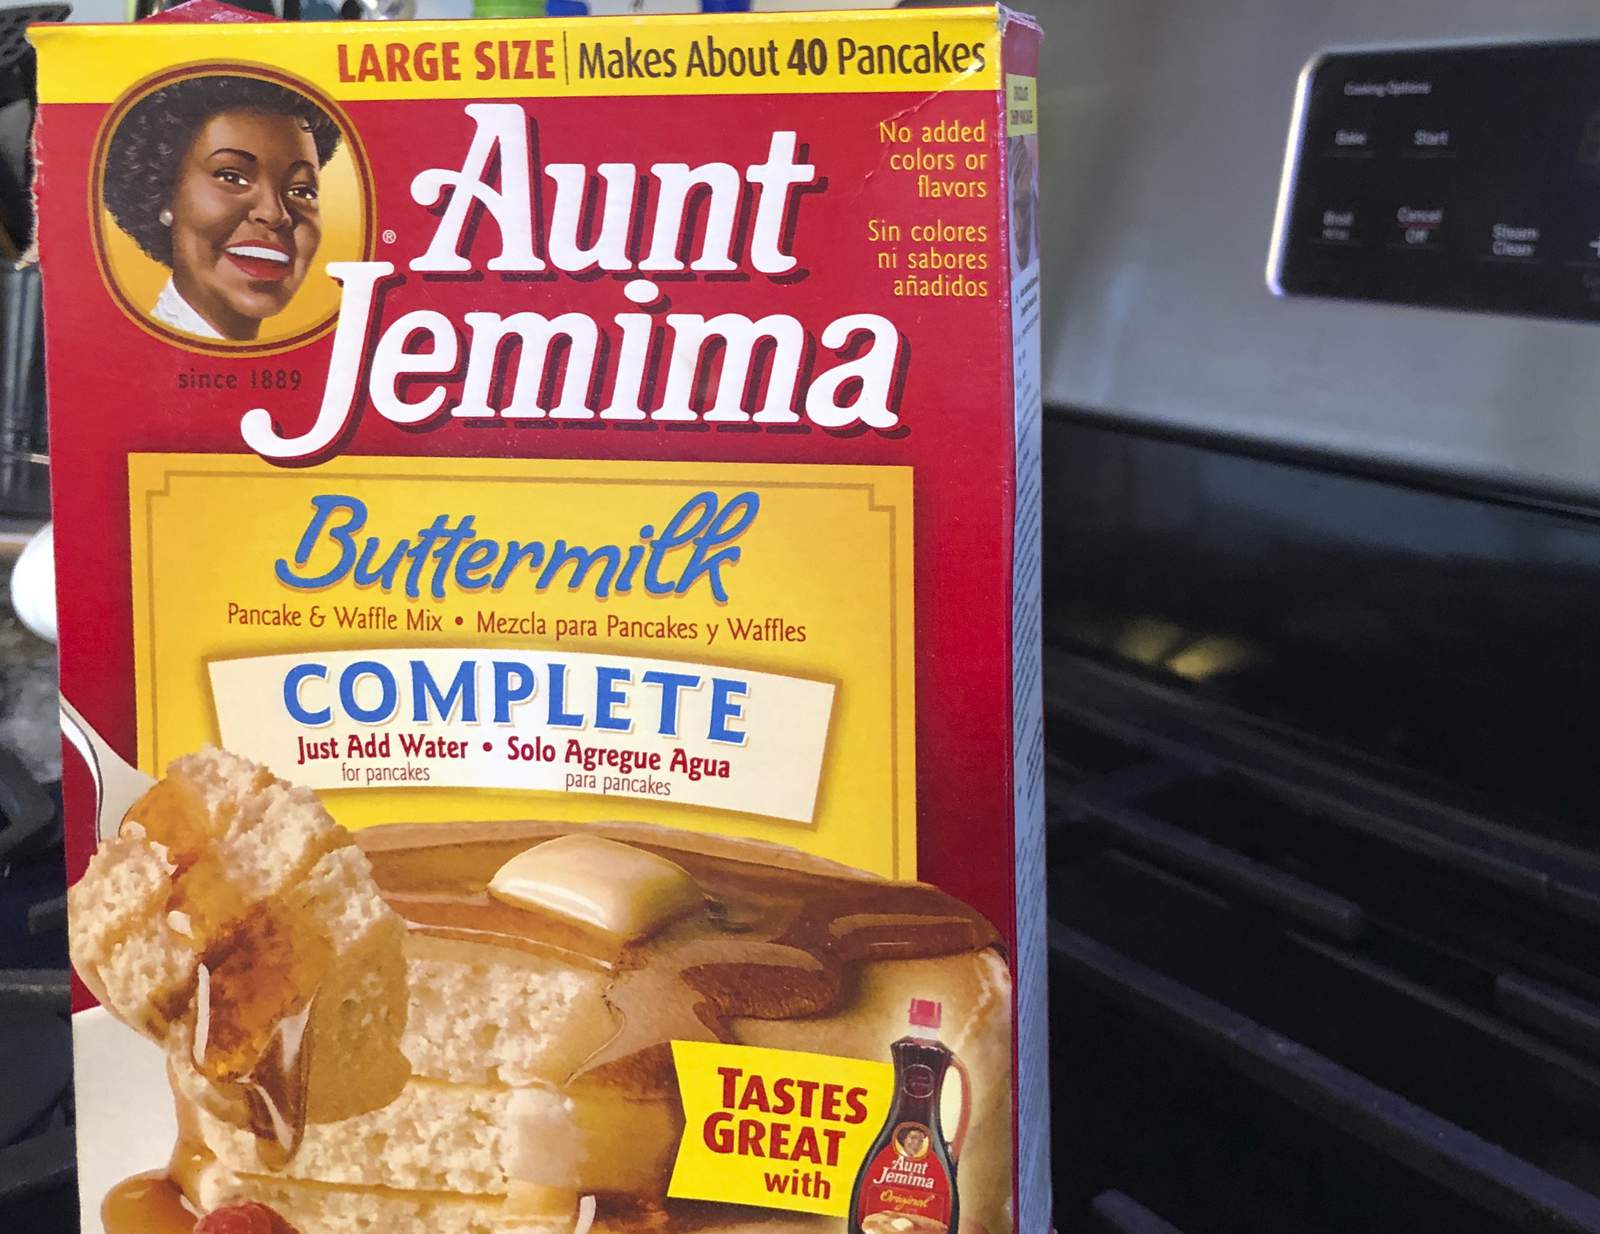 Aunt Jemima brand retired by Quaker due to racial stereotype